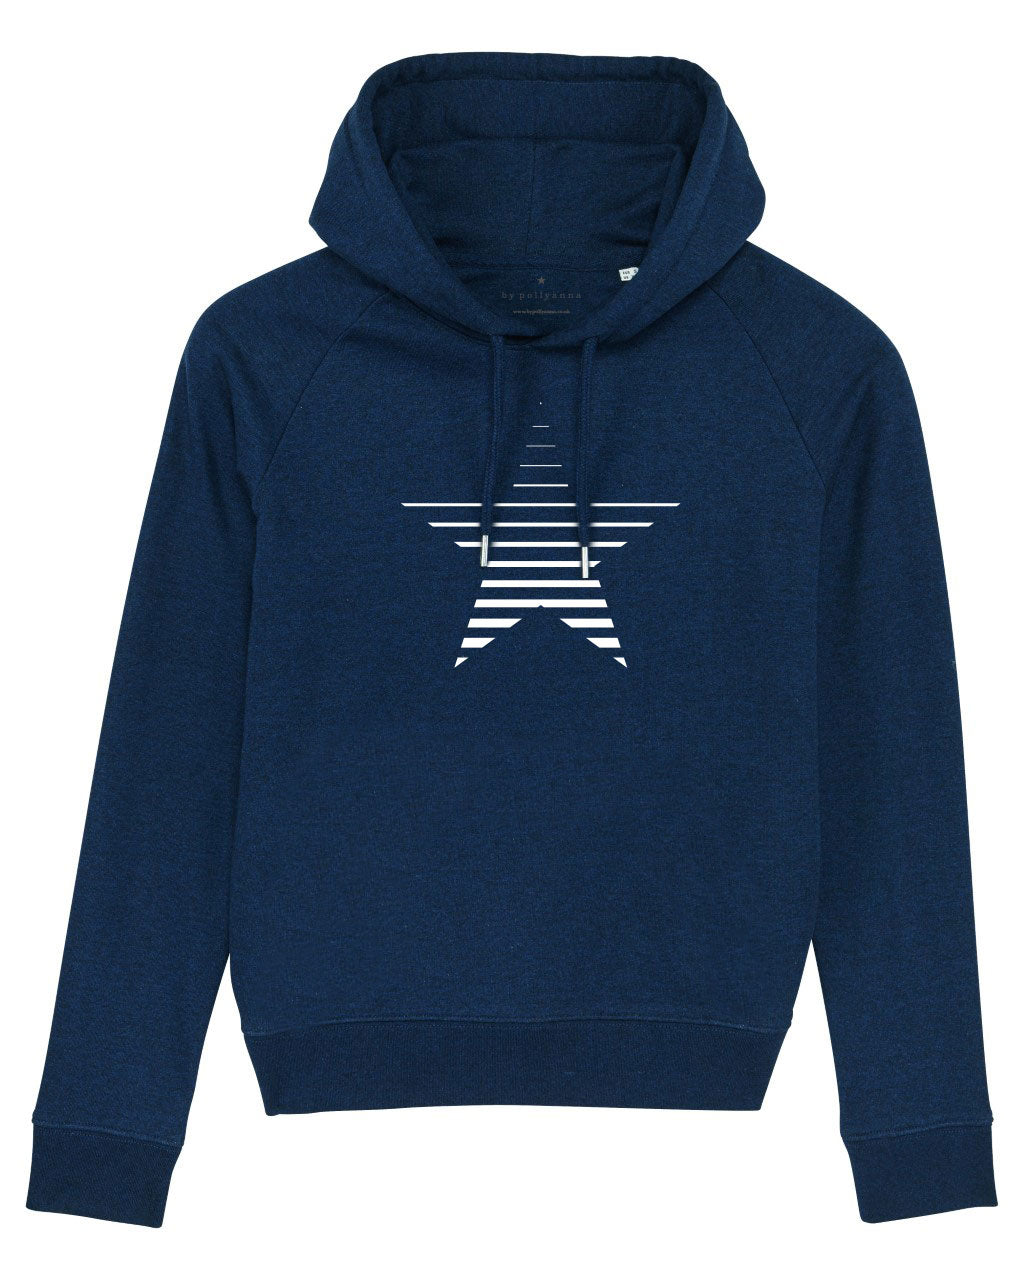 Navy Striped Star Hoodie - MADE TO ORDER